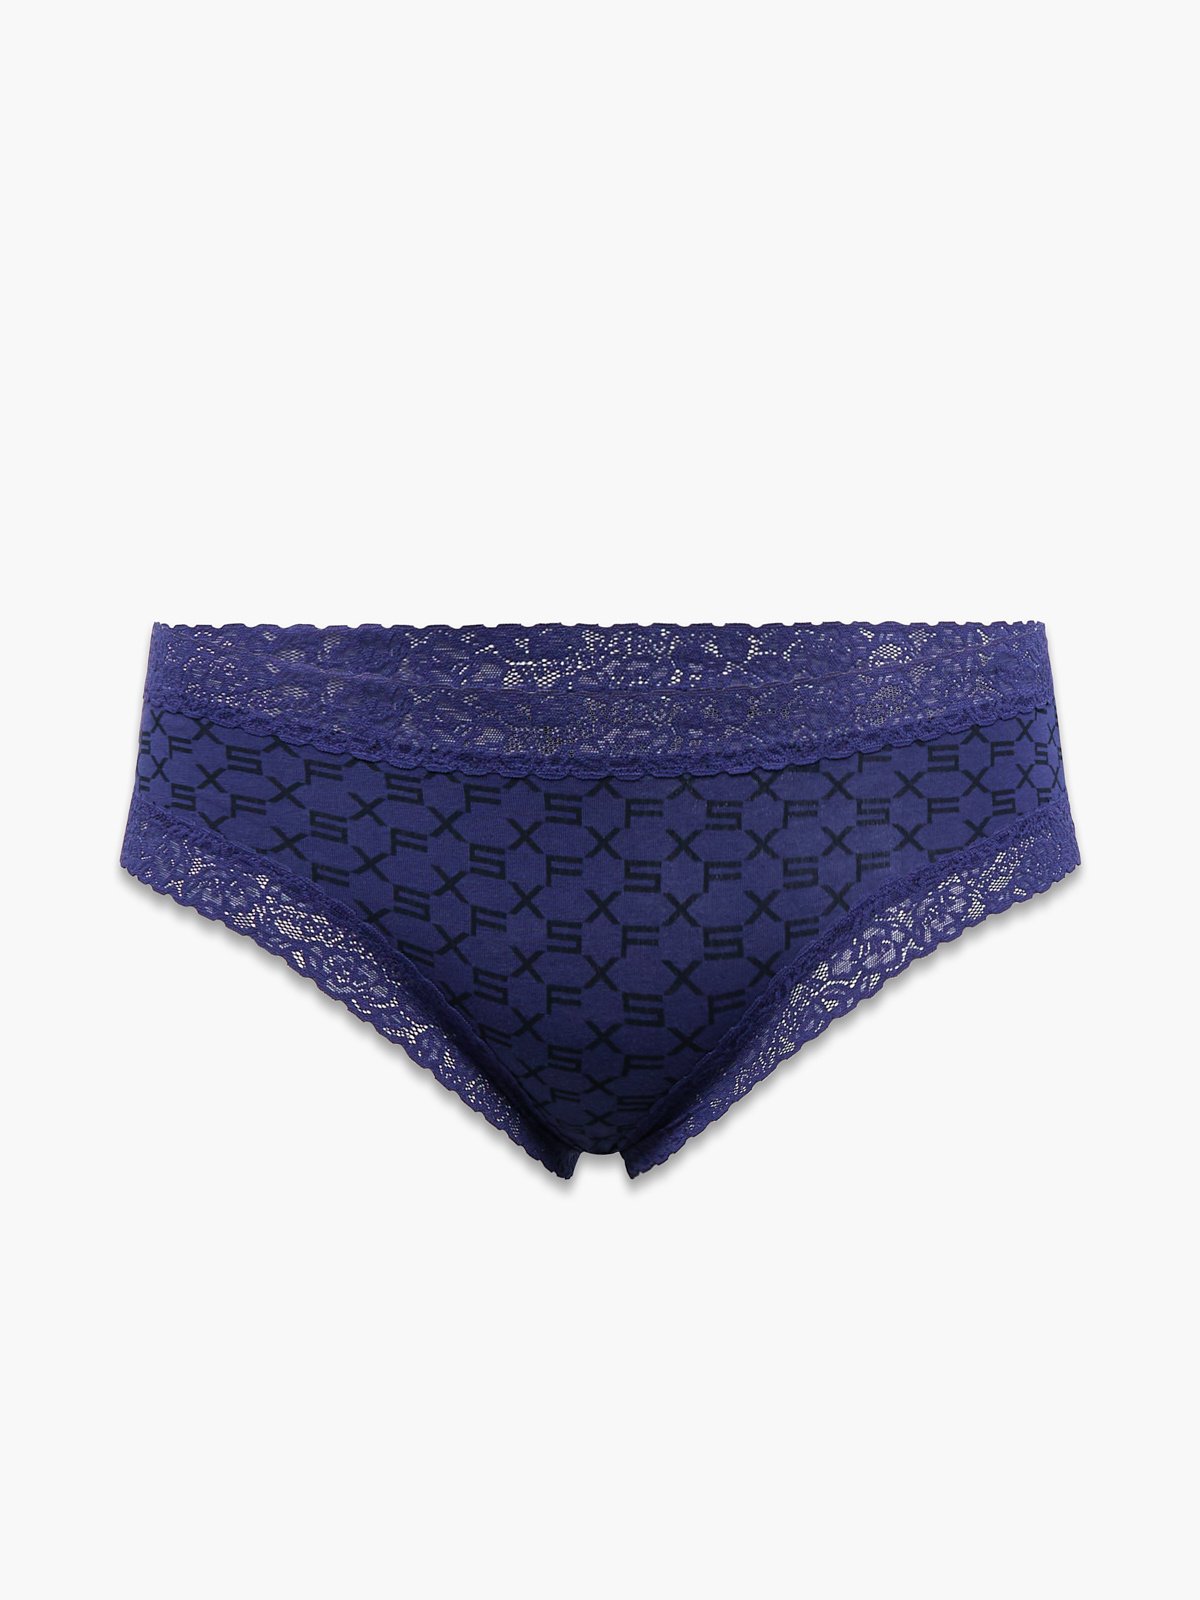 Cotton and Lace Band Cheeky Panty - Twilight blue